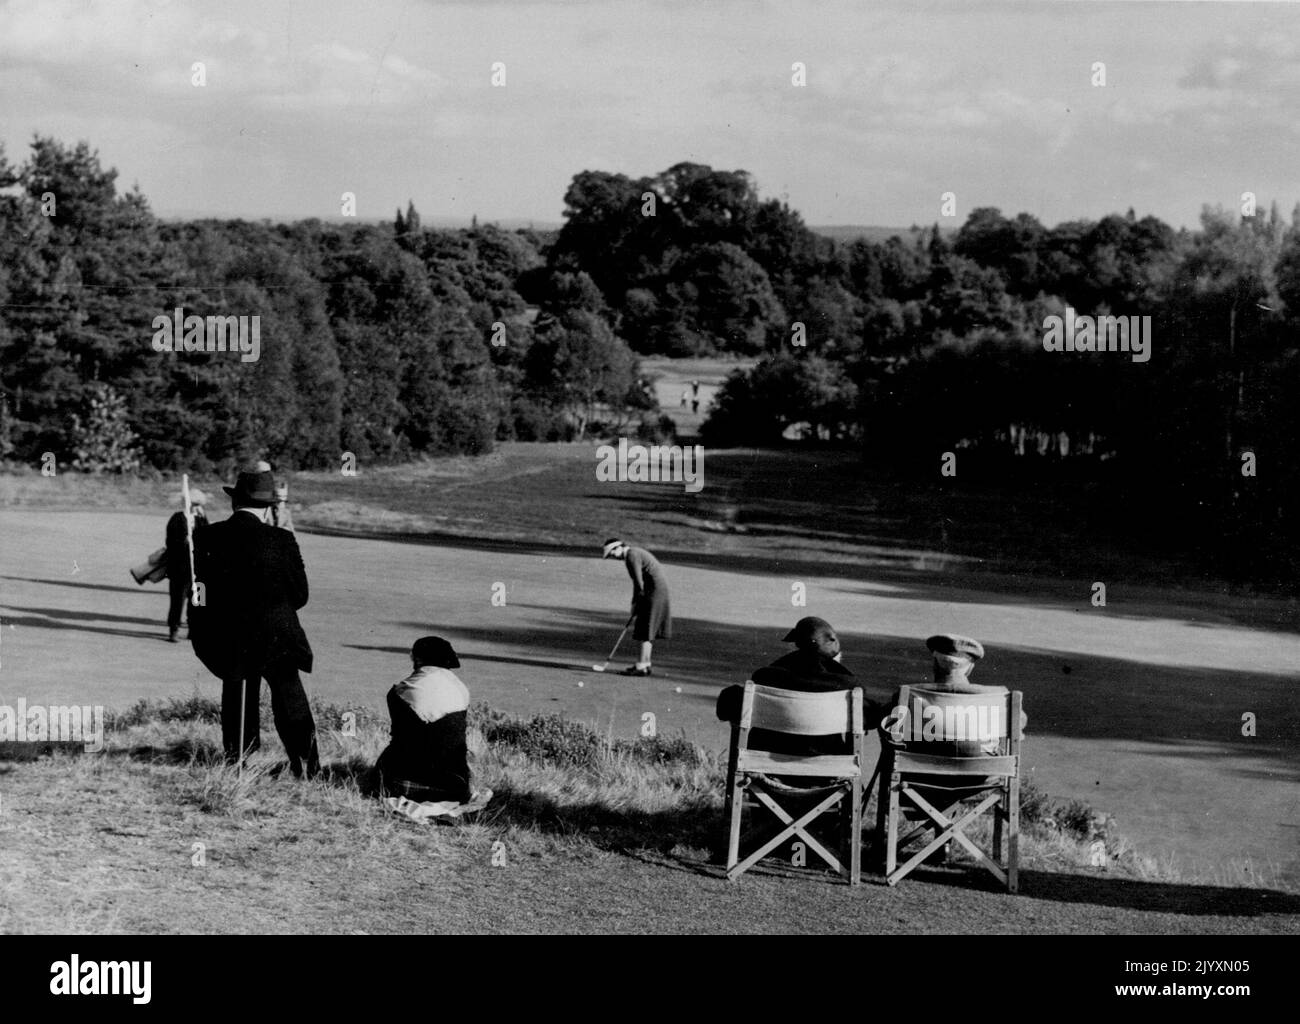 First Day Of The Worplesdon Foursomes - The Open mixed scratch foursomes golf tournament opened at Worplesdon, Surrey to-day. This picture shows A Group of spectators as they watch play in one of the greens, against a pleasant Surrey background. November 8, 1954. (Photo by Daily Mail Contract Picture). Stock Photo